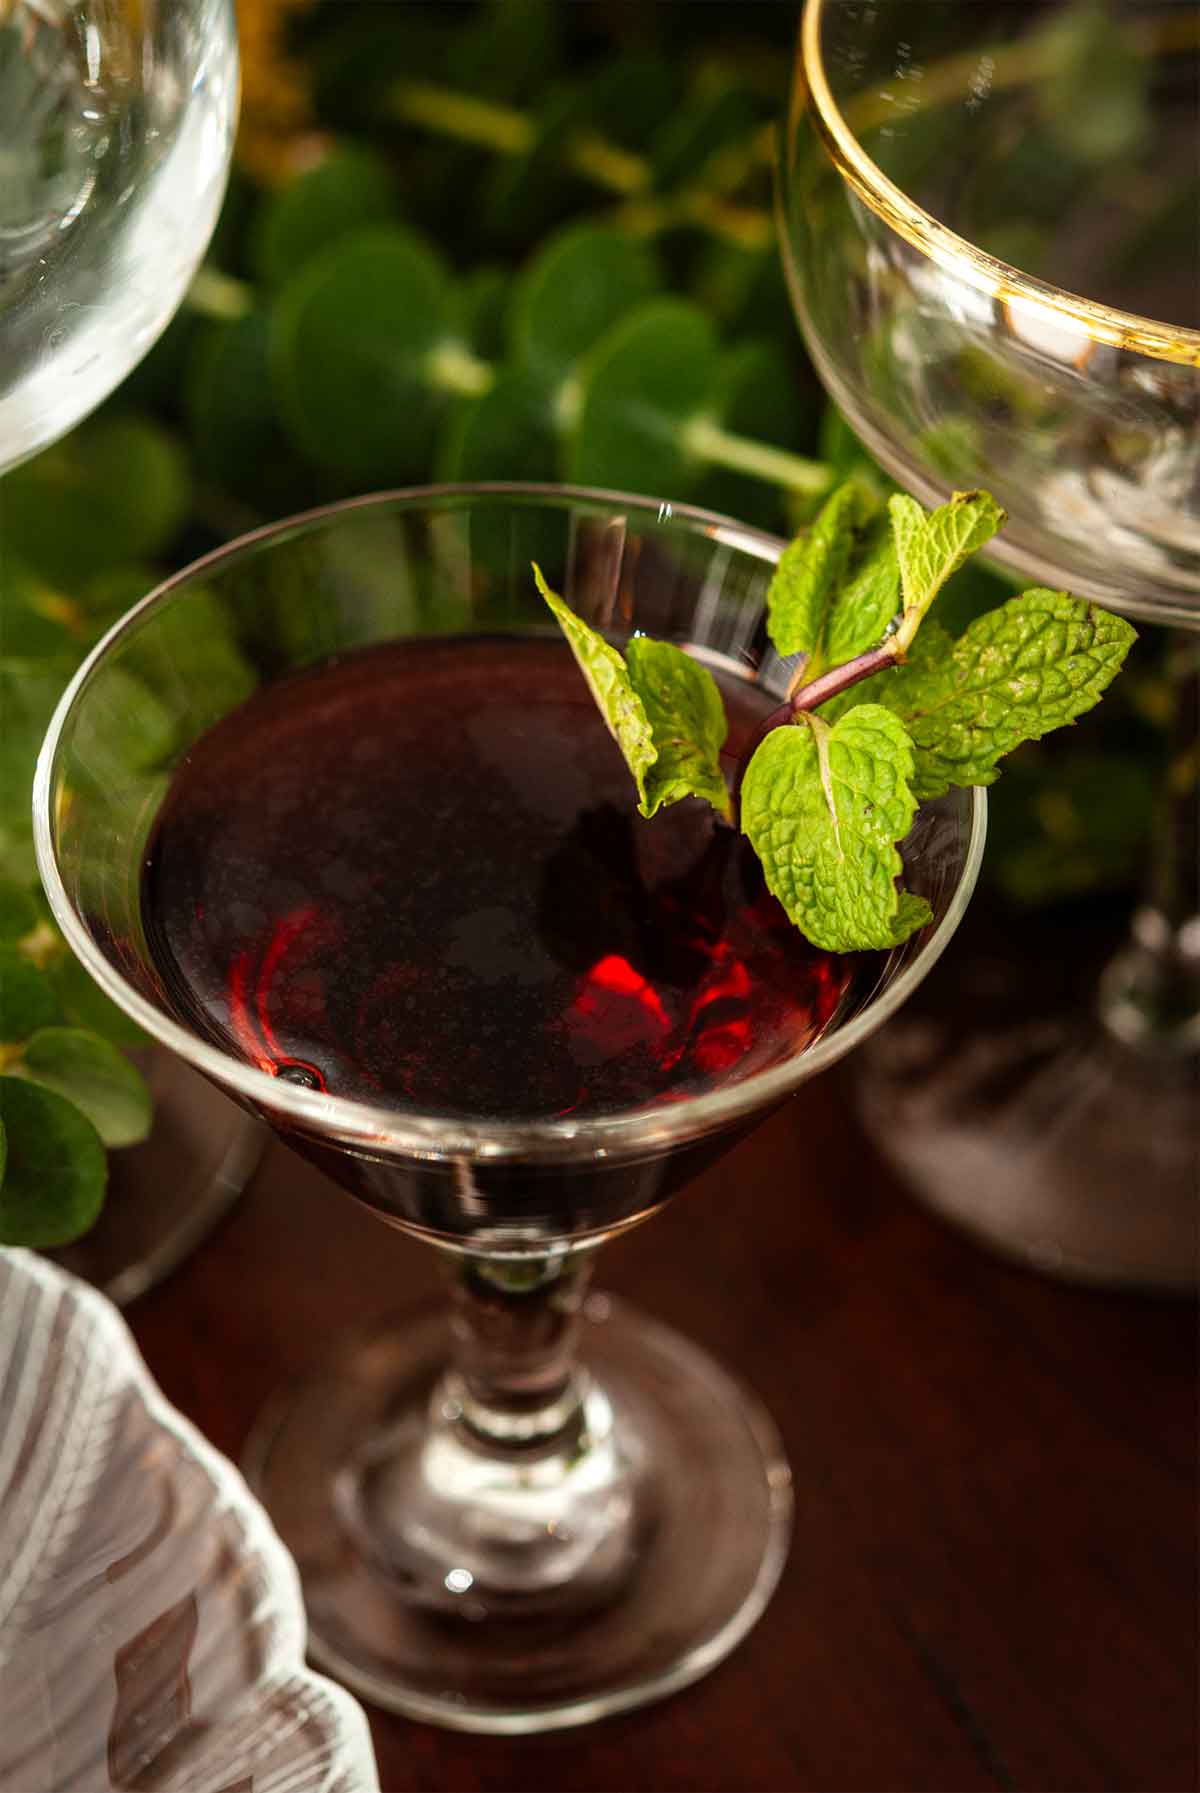 A cordial glass filled with Sorel Liqueur, garnished with mint on a table.